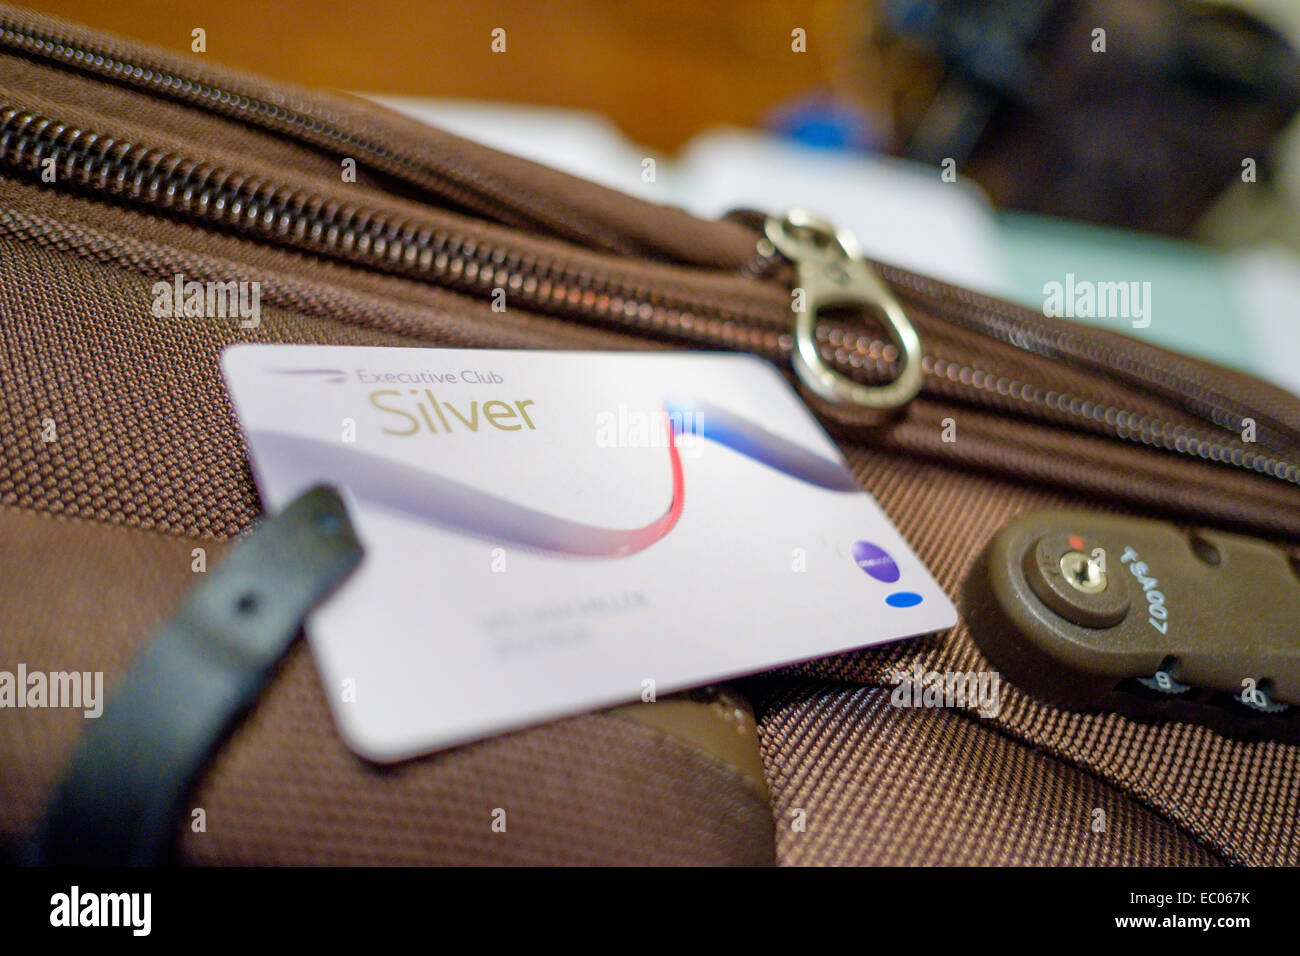 A Silver frequent flyer Executive Club card from British Airways attached to a suitcase. Stock Photo